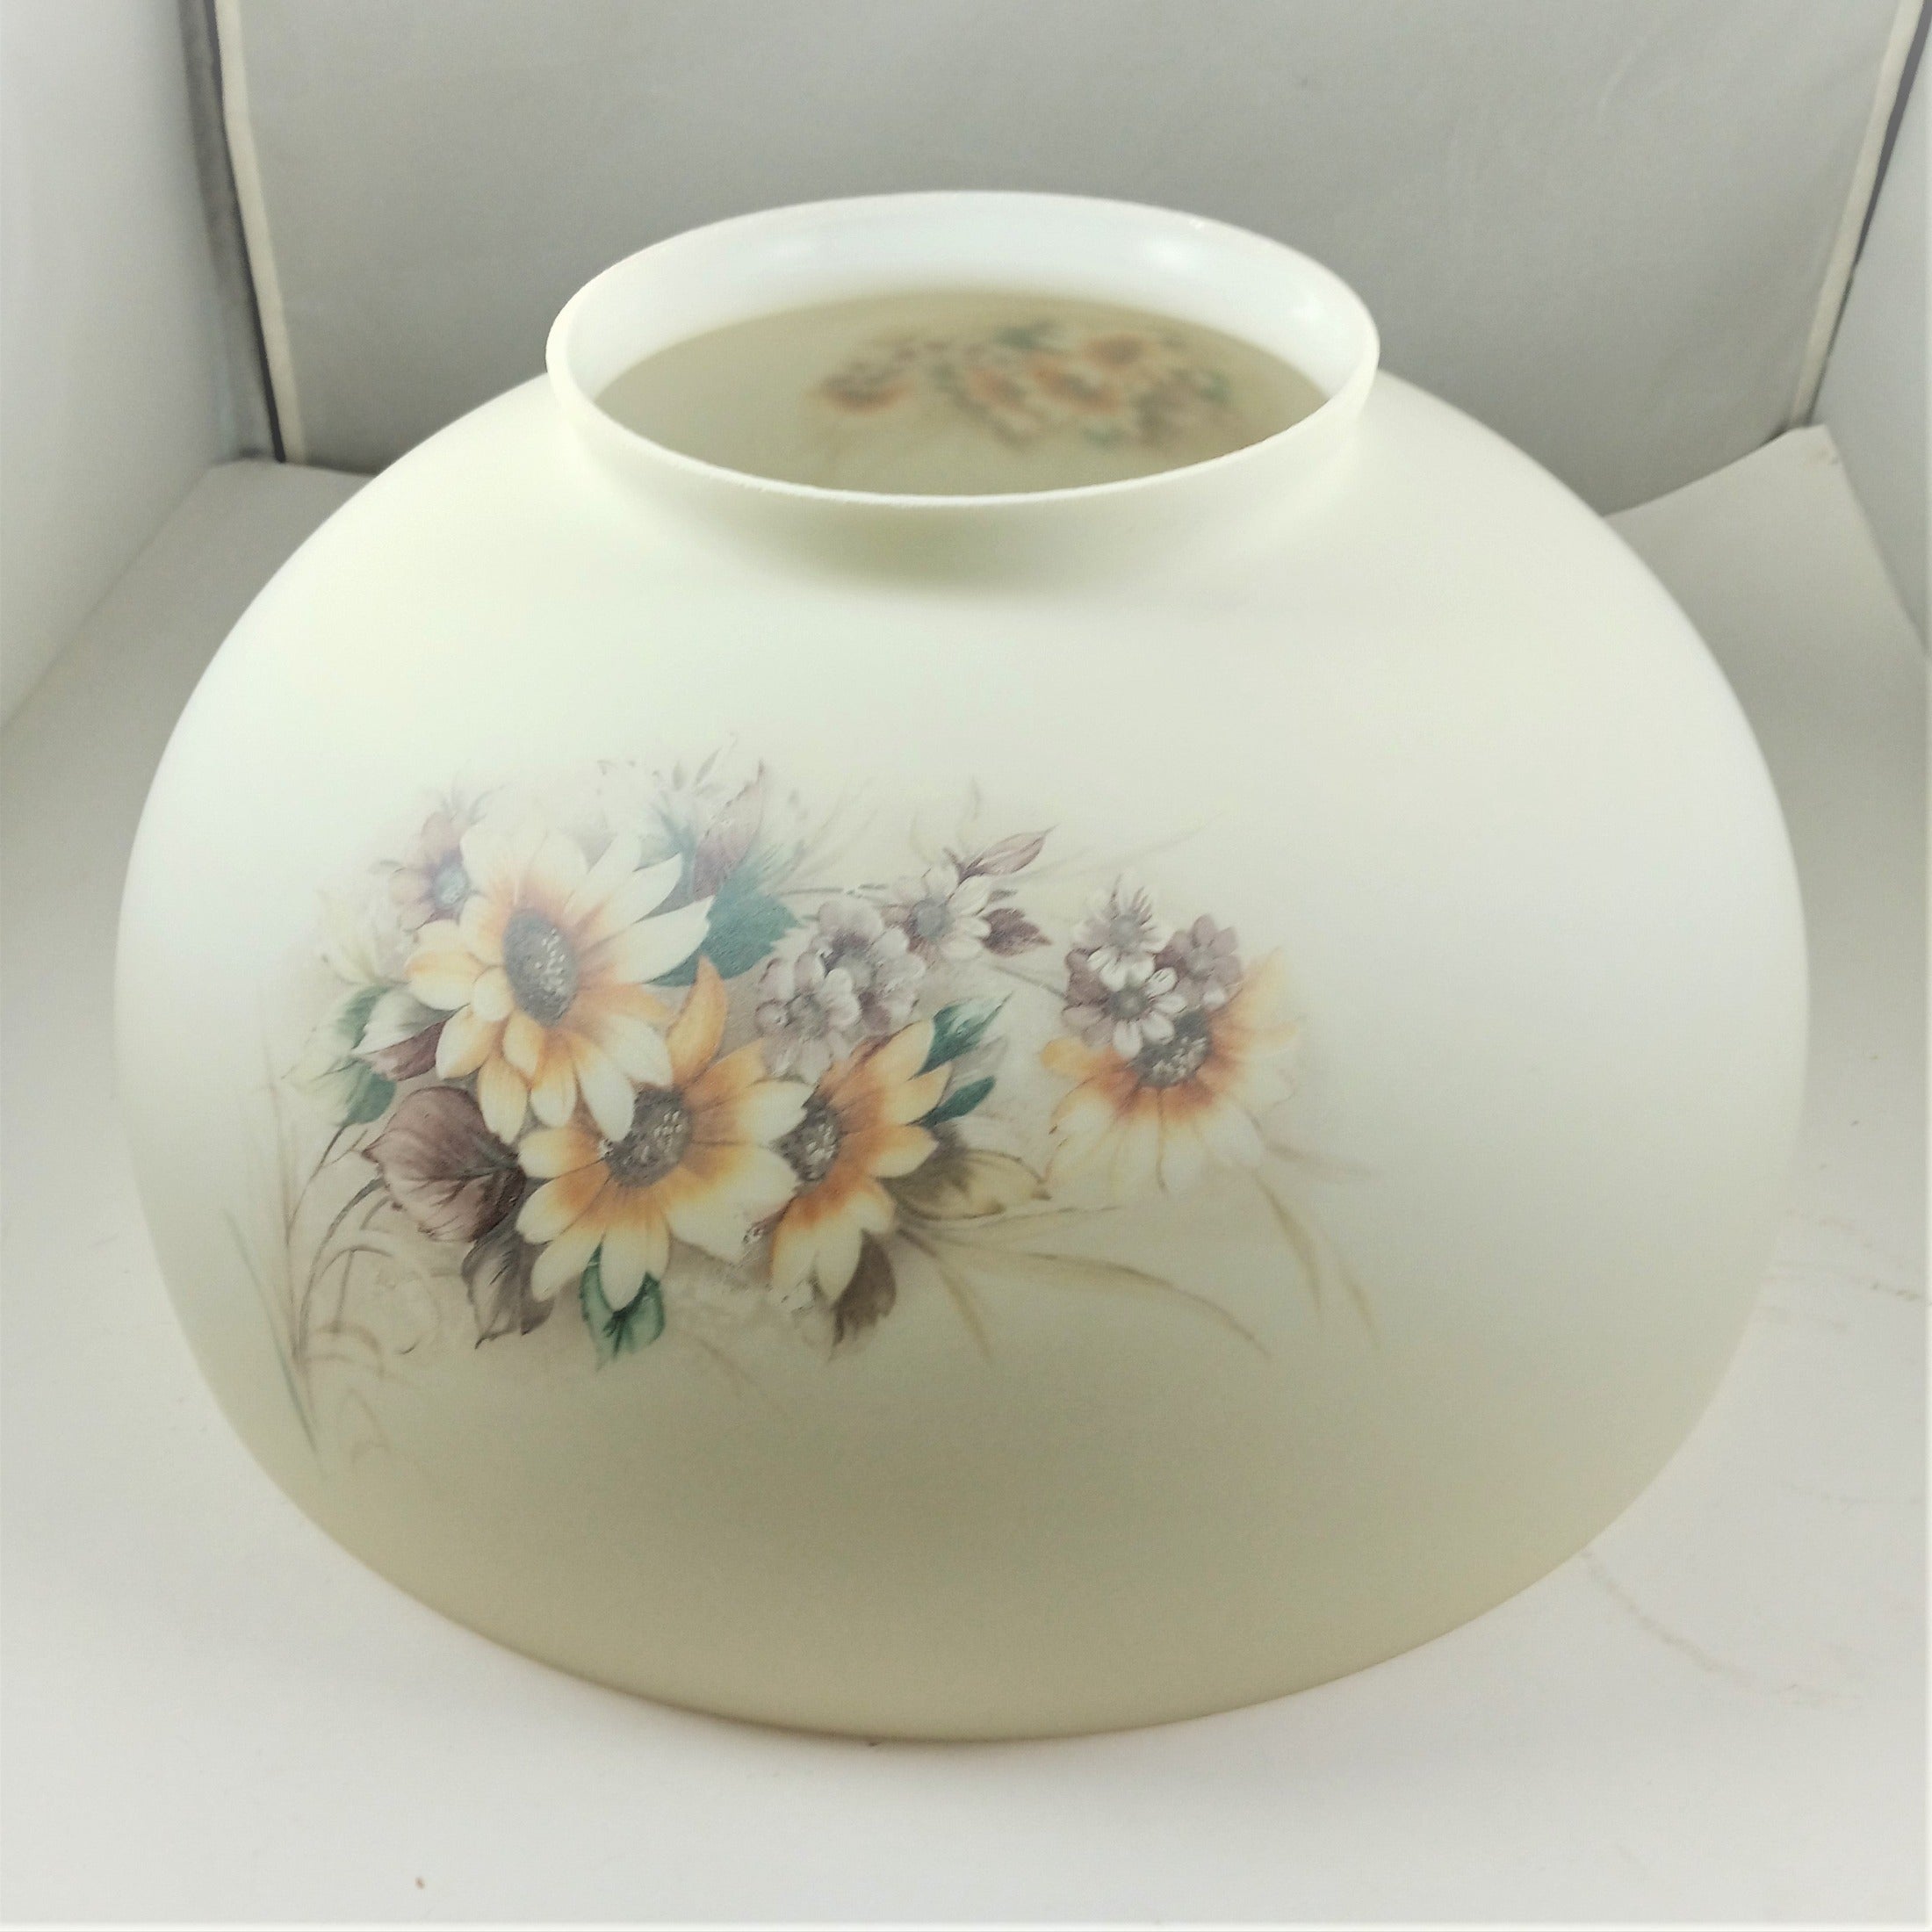 Sunflower florals on large off hued white - 14 inch fitter